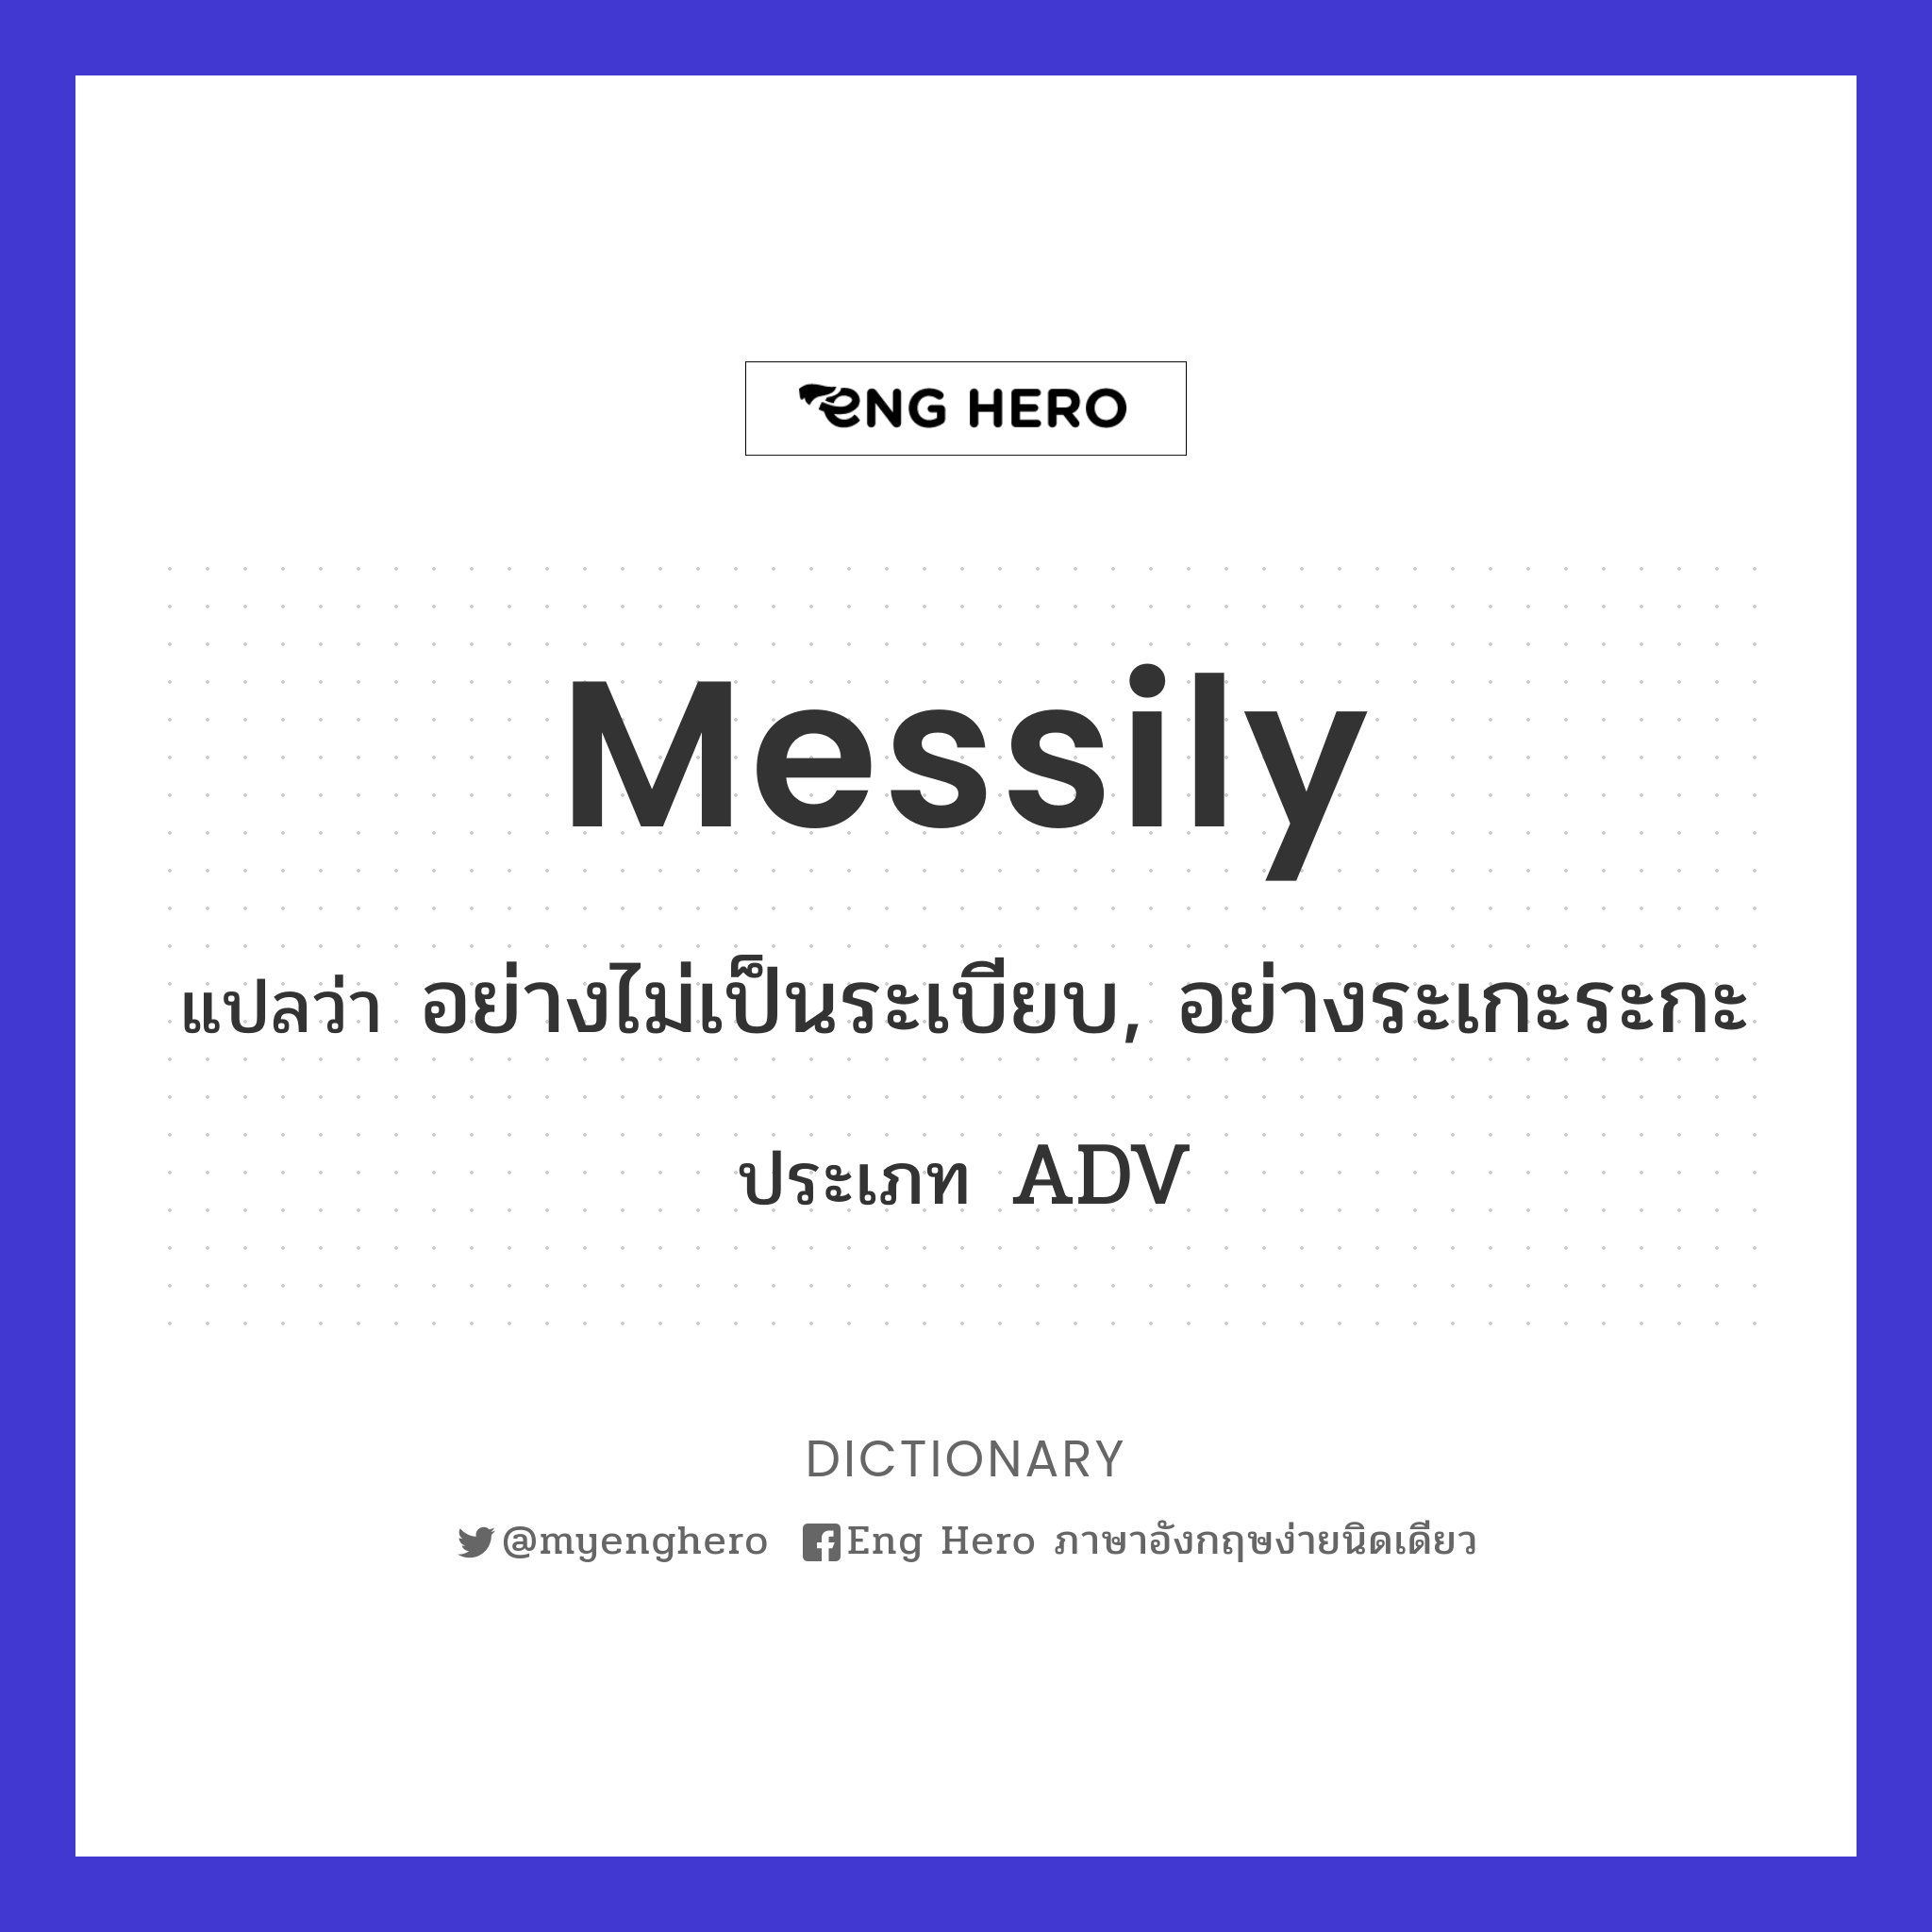 messily